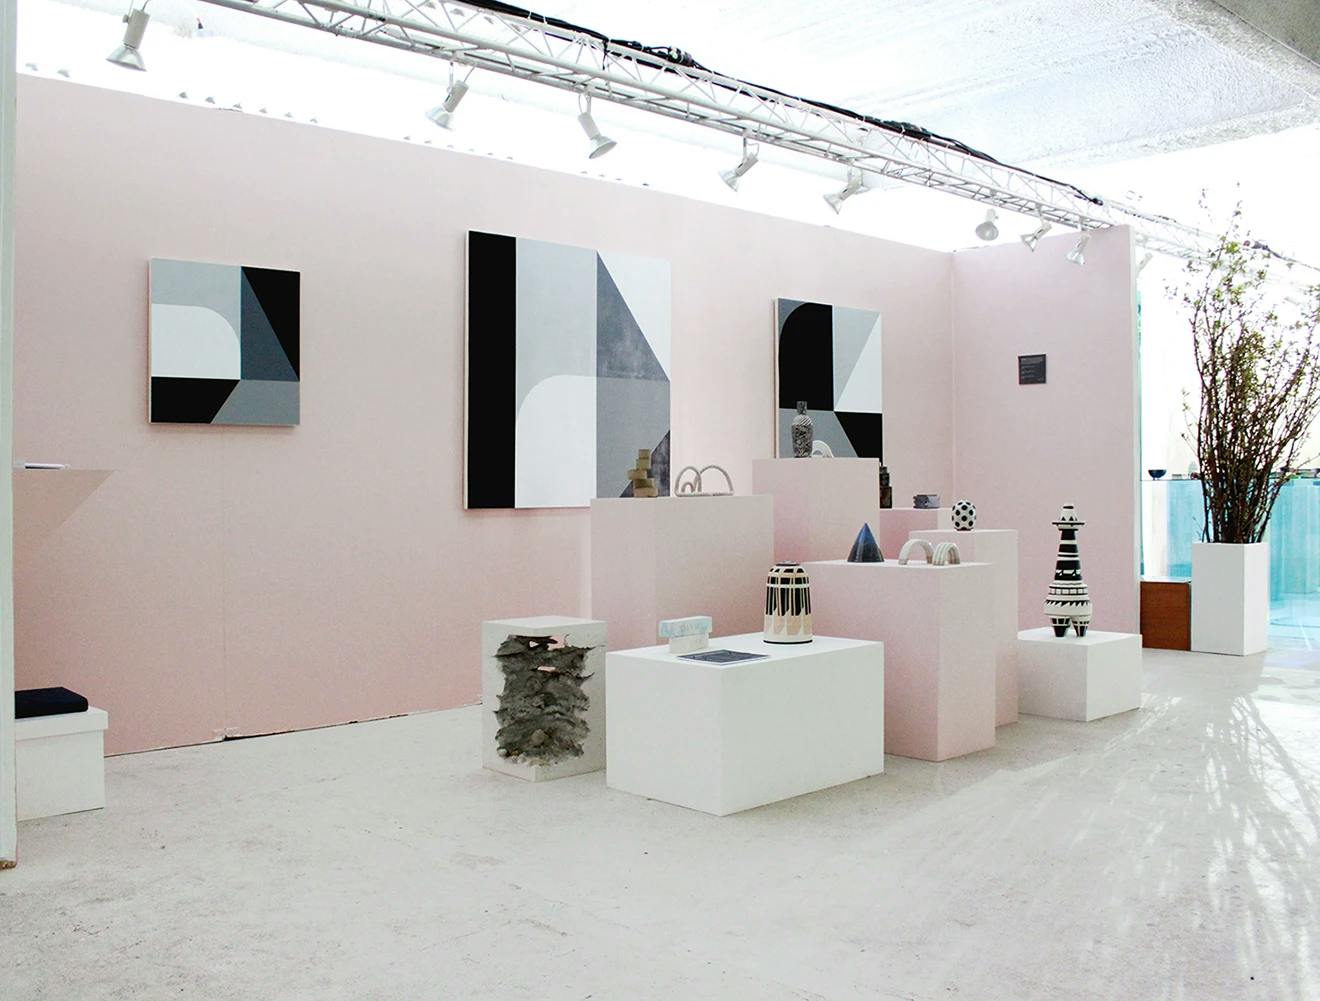 Artwork installed as part of Sight Unseen OFFSITE, one of Uprise Art's Art Fairs in New York, NY.